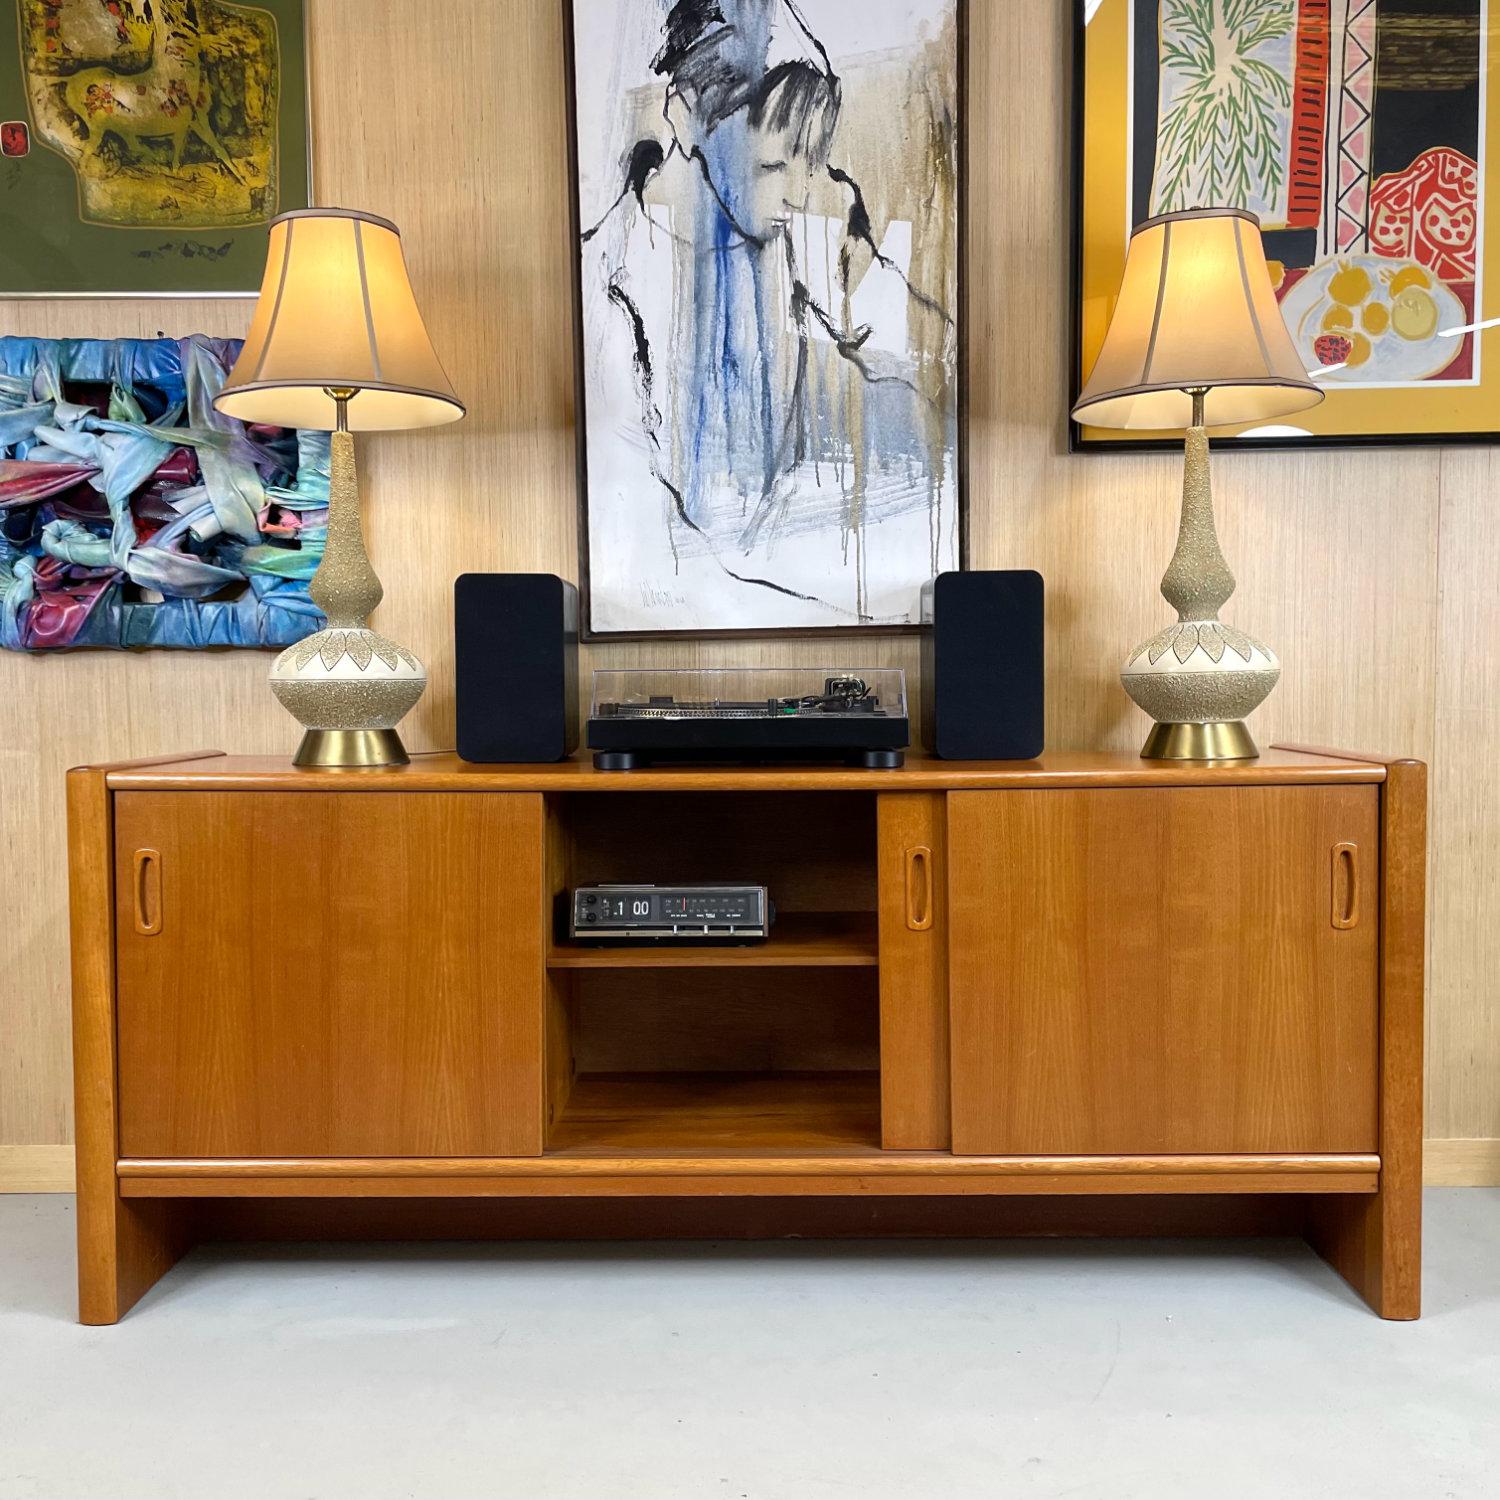 Danish teak credenza with sliding doors. Use this high-capacity storage solution as a TV Stand / media center or office credenza. The sliding doors allow easy access to the ample cabinet space inside. A single felt-lined drawer resides in the upper